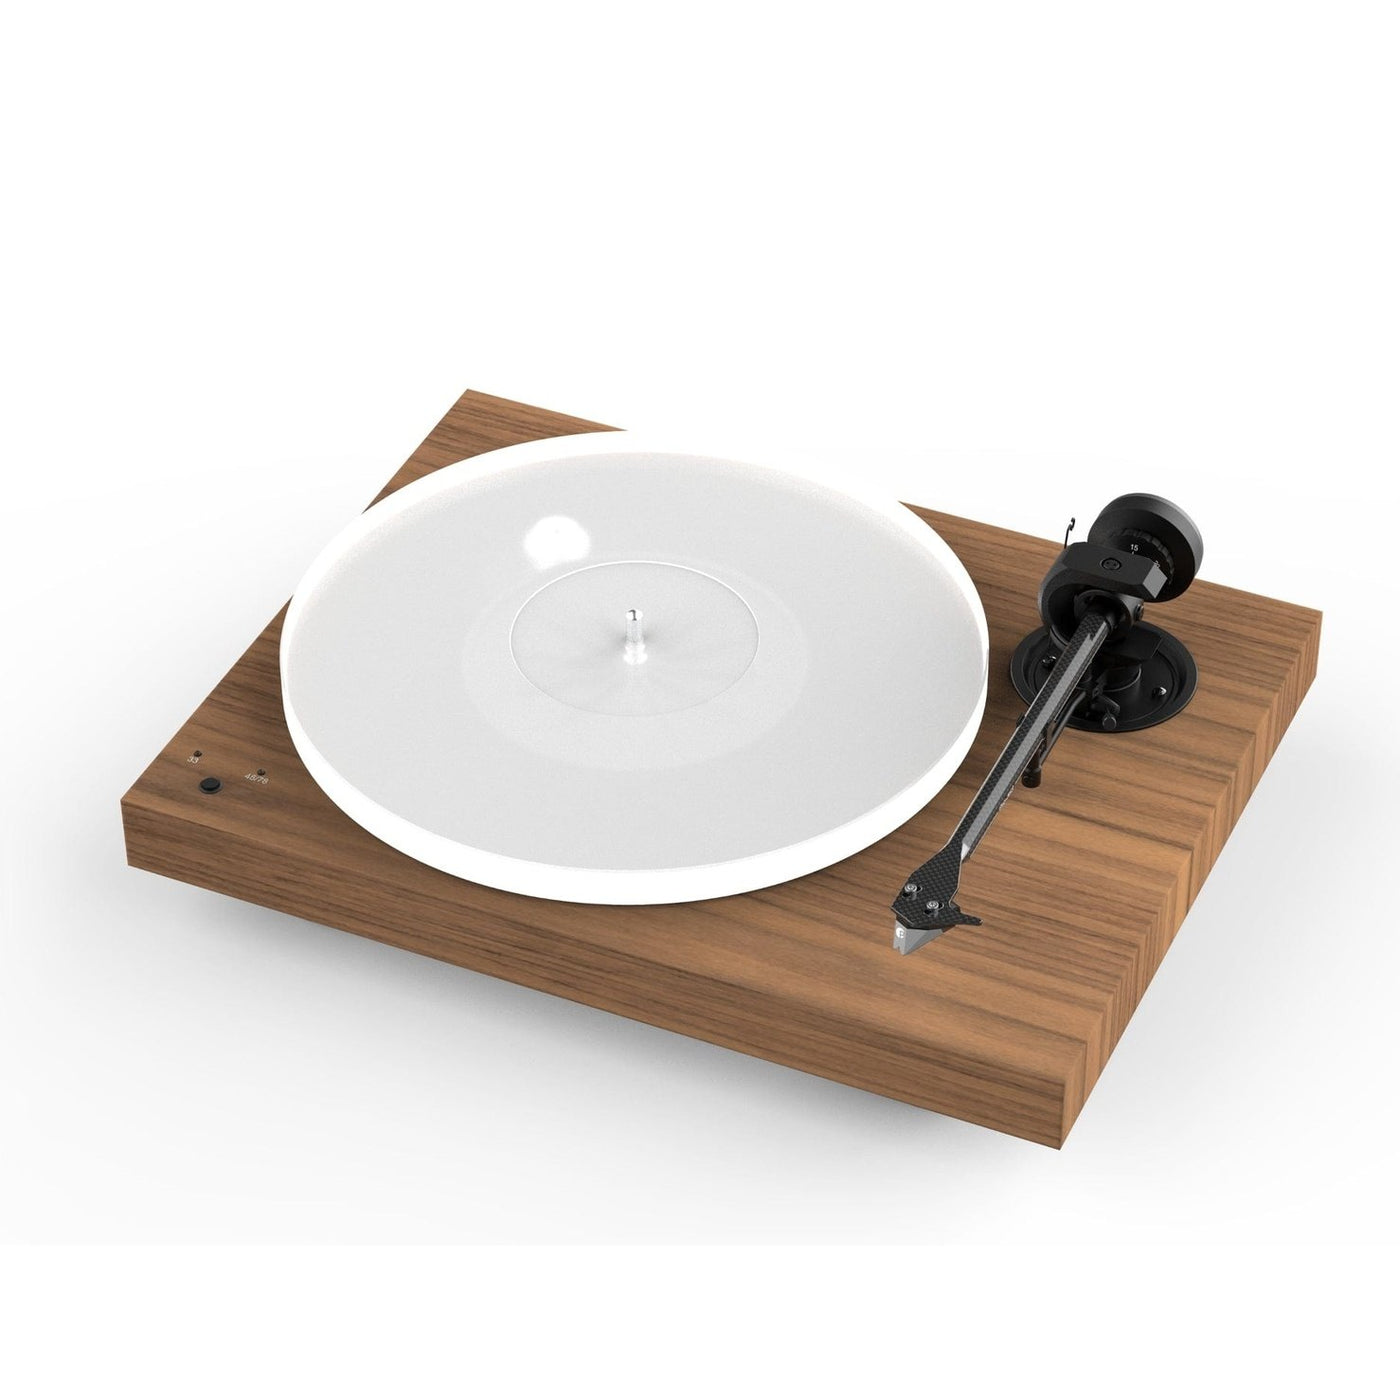 Pro-Ject Pro-Ject X1 B Turntable with Pick It PRO Balanced Pre-Fitted Turntables